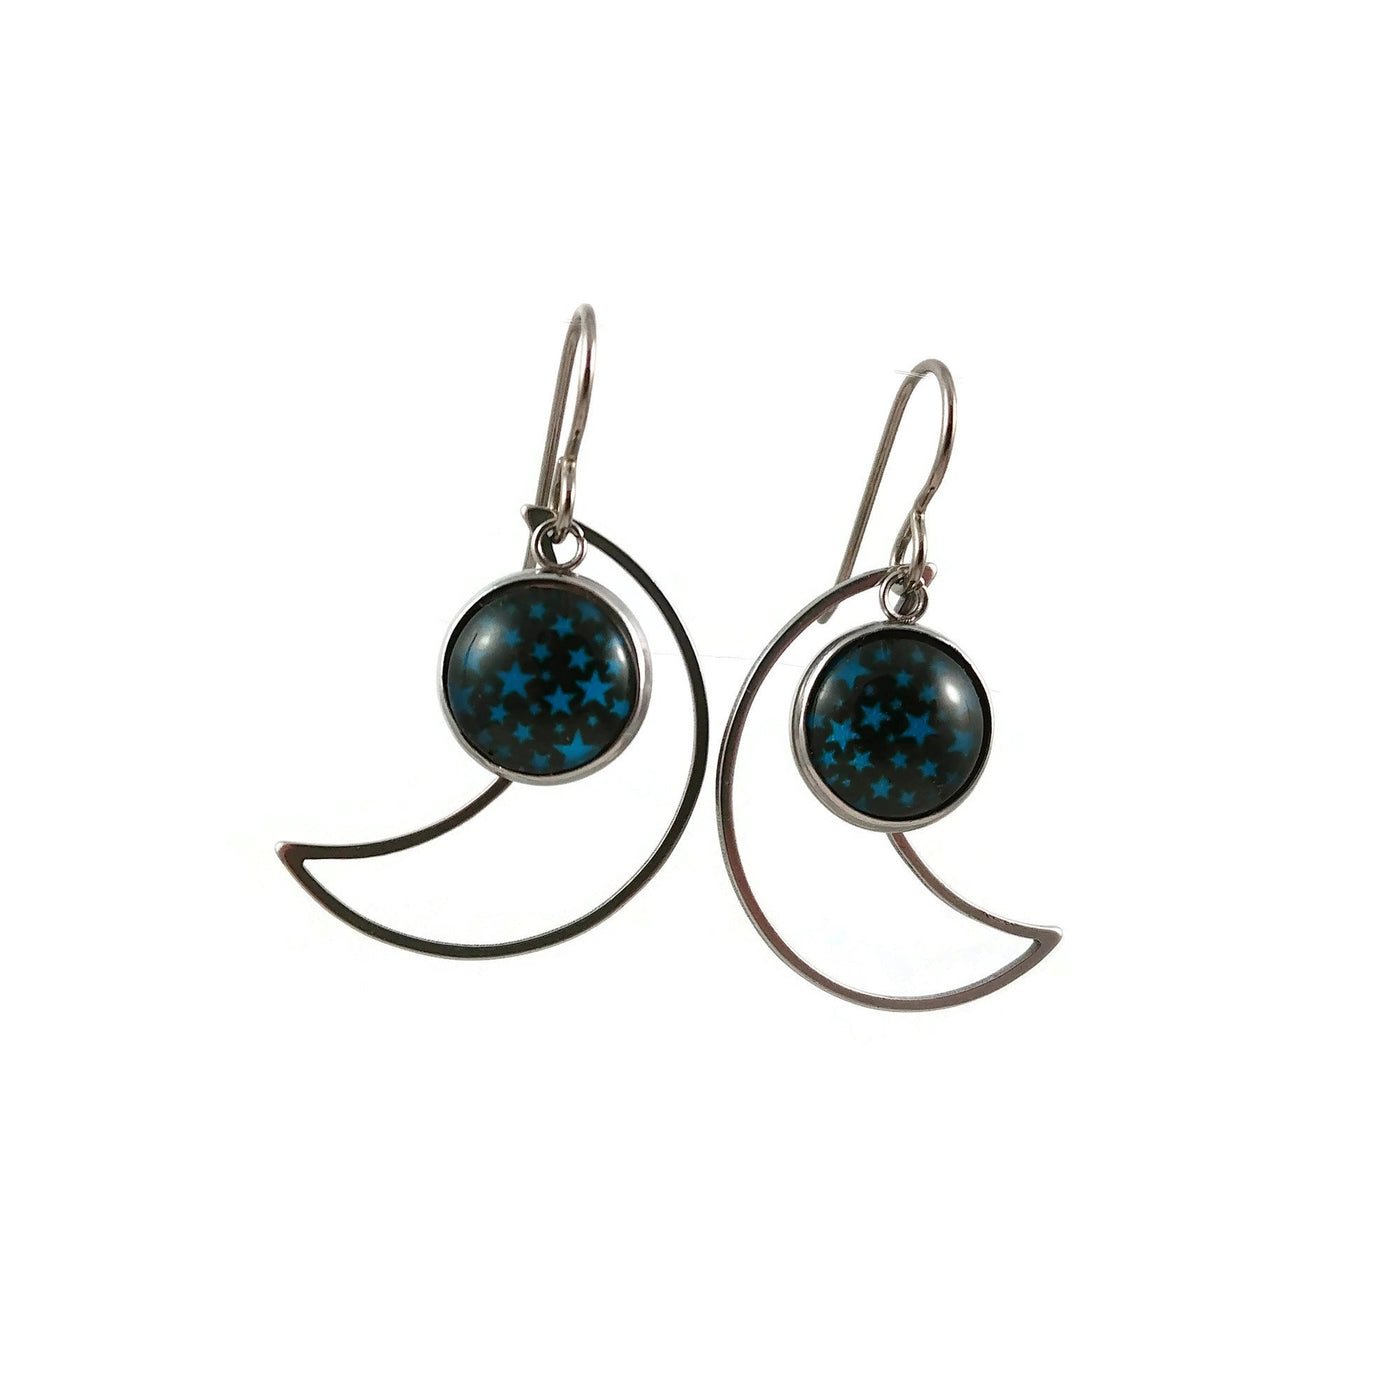 Moon and blue star charm dangle earrings - Hypoallergenic pure titanium, resin and stainless steel